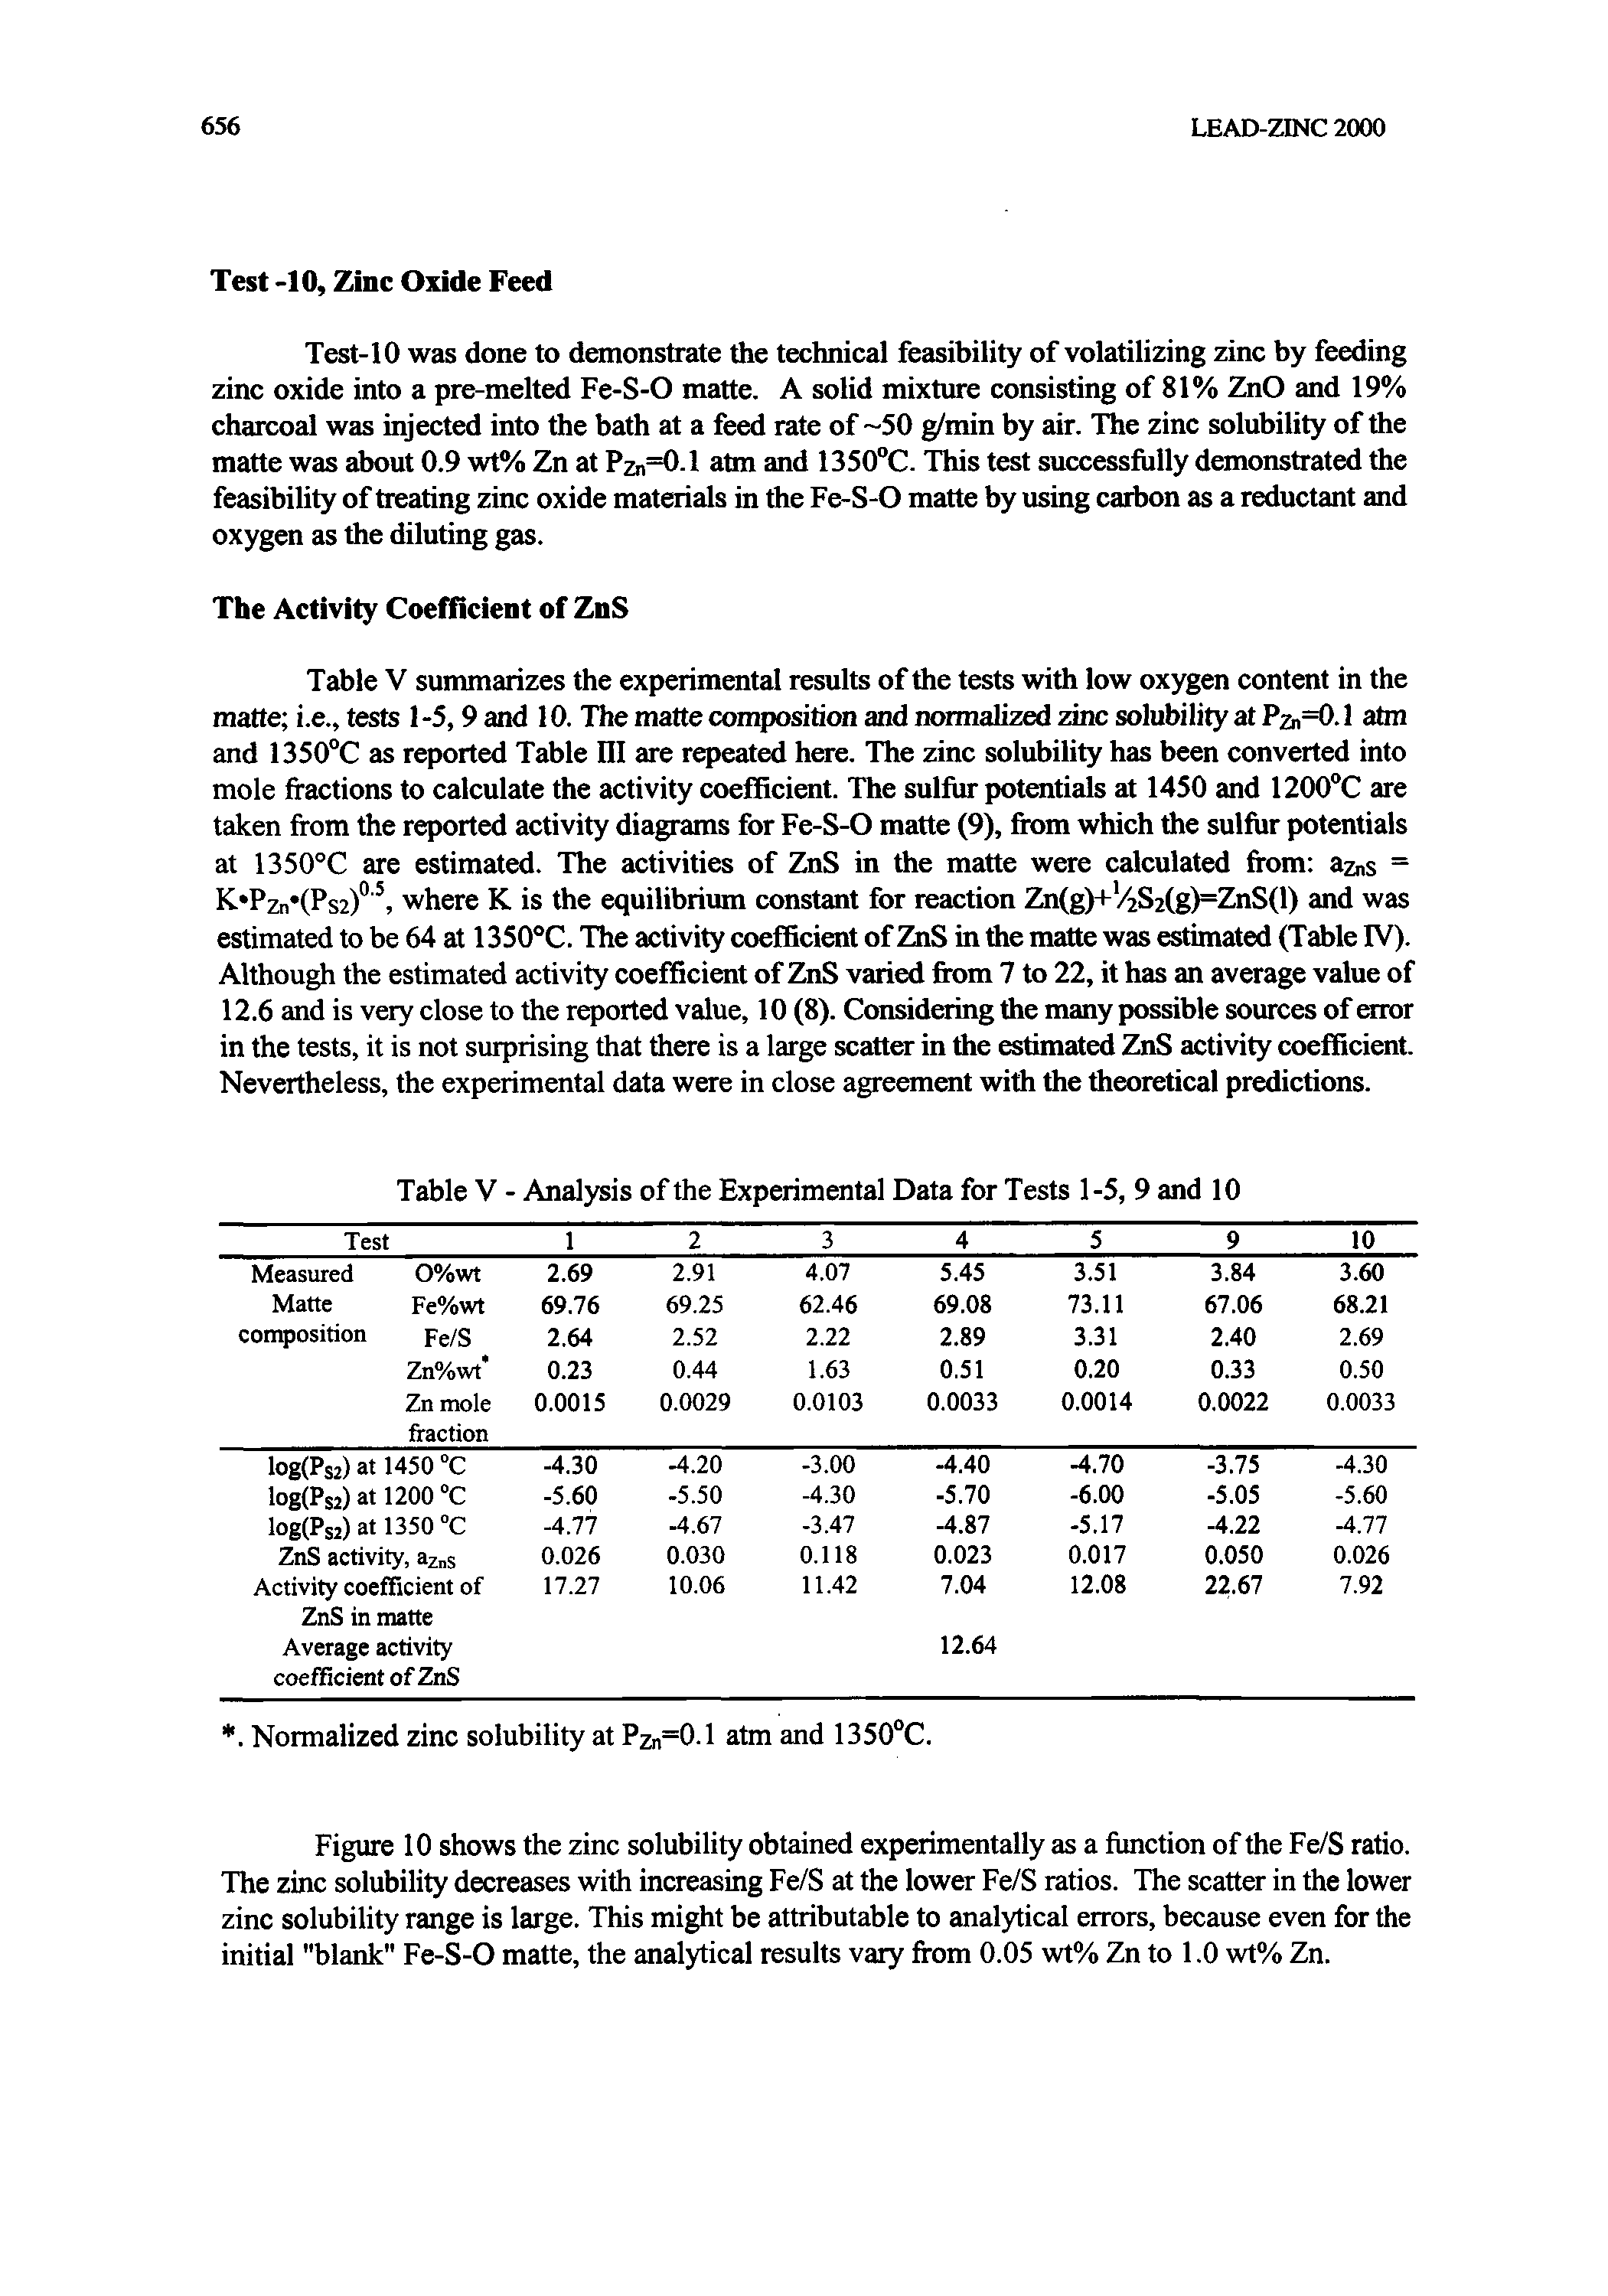 Table V summarizes the experimental results of the tests with low oxygen content in the matte i.e., tests 1-5,9and 10. The matte conqxrsititMi and nramalized zinc solubility at Pzn=0.1 atm and 1350°C as reported Table III are repeated here. The zinc solubility has been converted into mole fractions to calculate the activity coefficient. The sulfur potentials at 1450 and 1200°C are taken from the reported activity diagrams for Fe-S-O matte (9), from which the sulfur potentials at 1350°C are estimated. The activities of ZnS in the matte were calculated from azns = K Pzn (Ps2), where K is the equilibrium constant for reaction Zn(g)+V2S2(g)=ZnS(l) and was estimated to be 64 at 1350 C. The activity coefficient of ZnS in the matte was estimated (Table IV). Although the estimated activity coefficient of ZnS varied from 7 to 22, it has an average value of 12.6 and is very close to the reported value, 10 (8). Considering the many possible sources of aror in the tests, it is not surprising that there is a large scatta in the estimated ZnS activity coefficient Nevertheless, the experimental data wae in close agreement with the theoretical predictions.